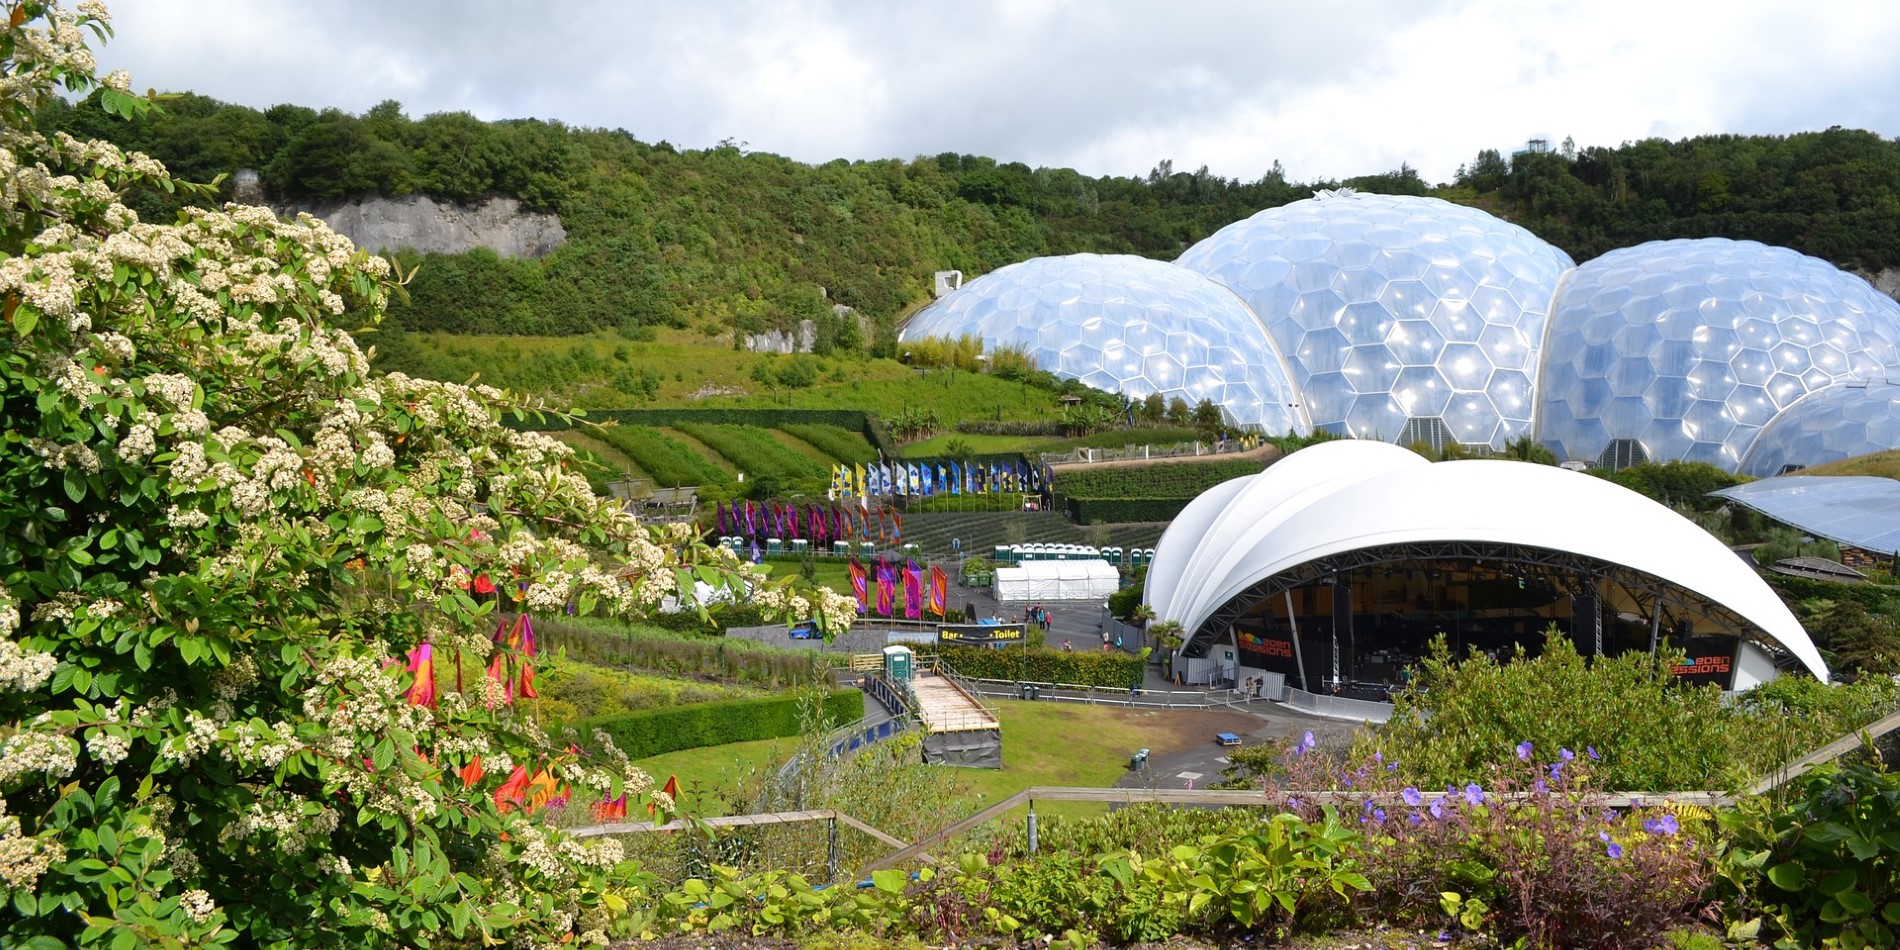 The Eden project, Fowey